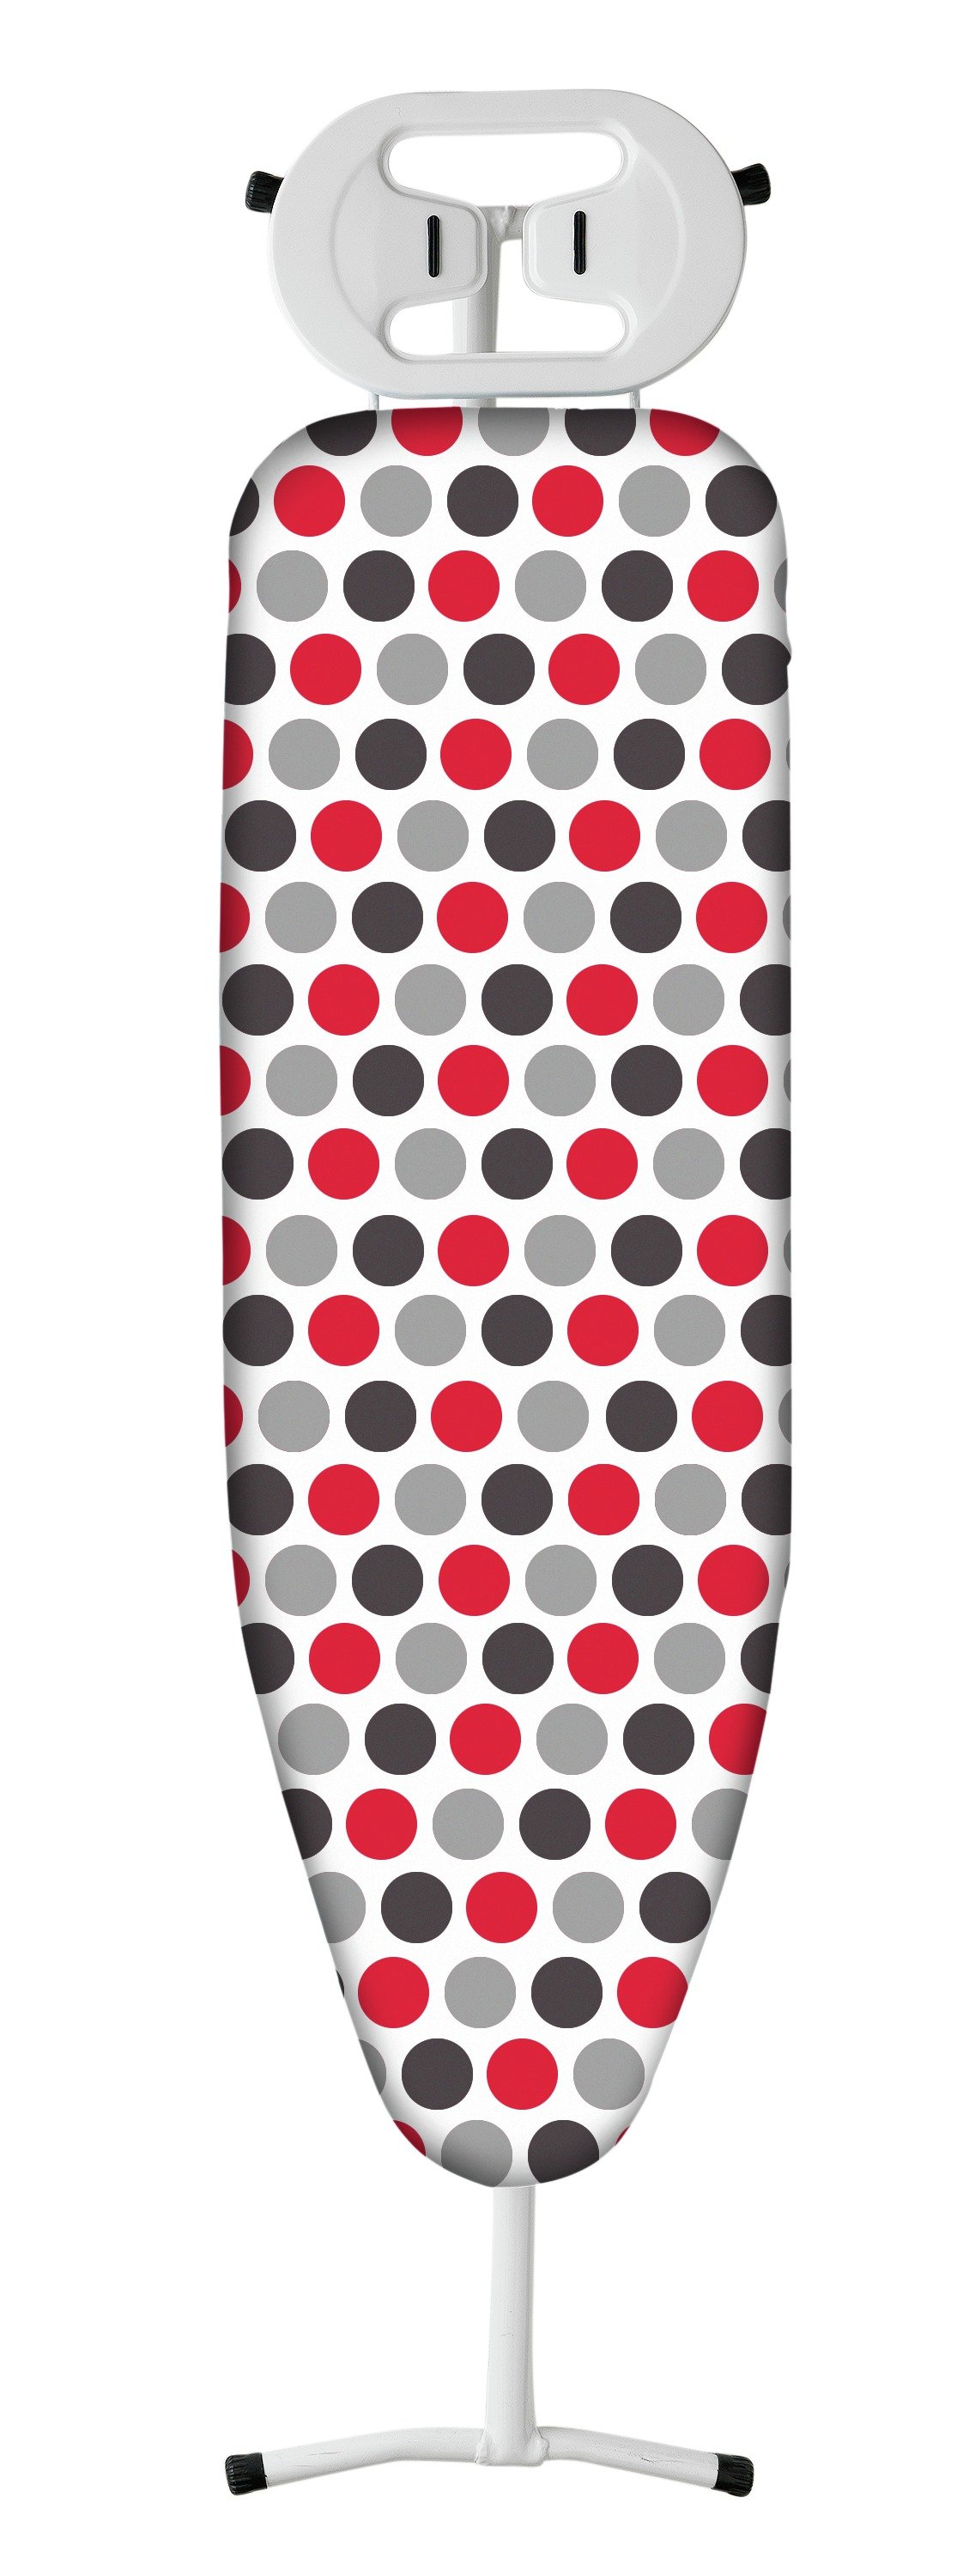 Argos Home Folding Ironing Board 110 x 33cm - Spotted